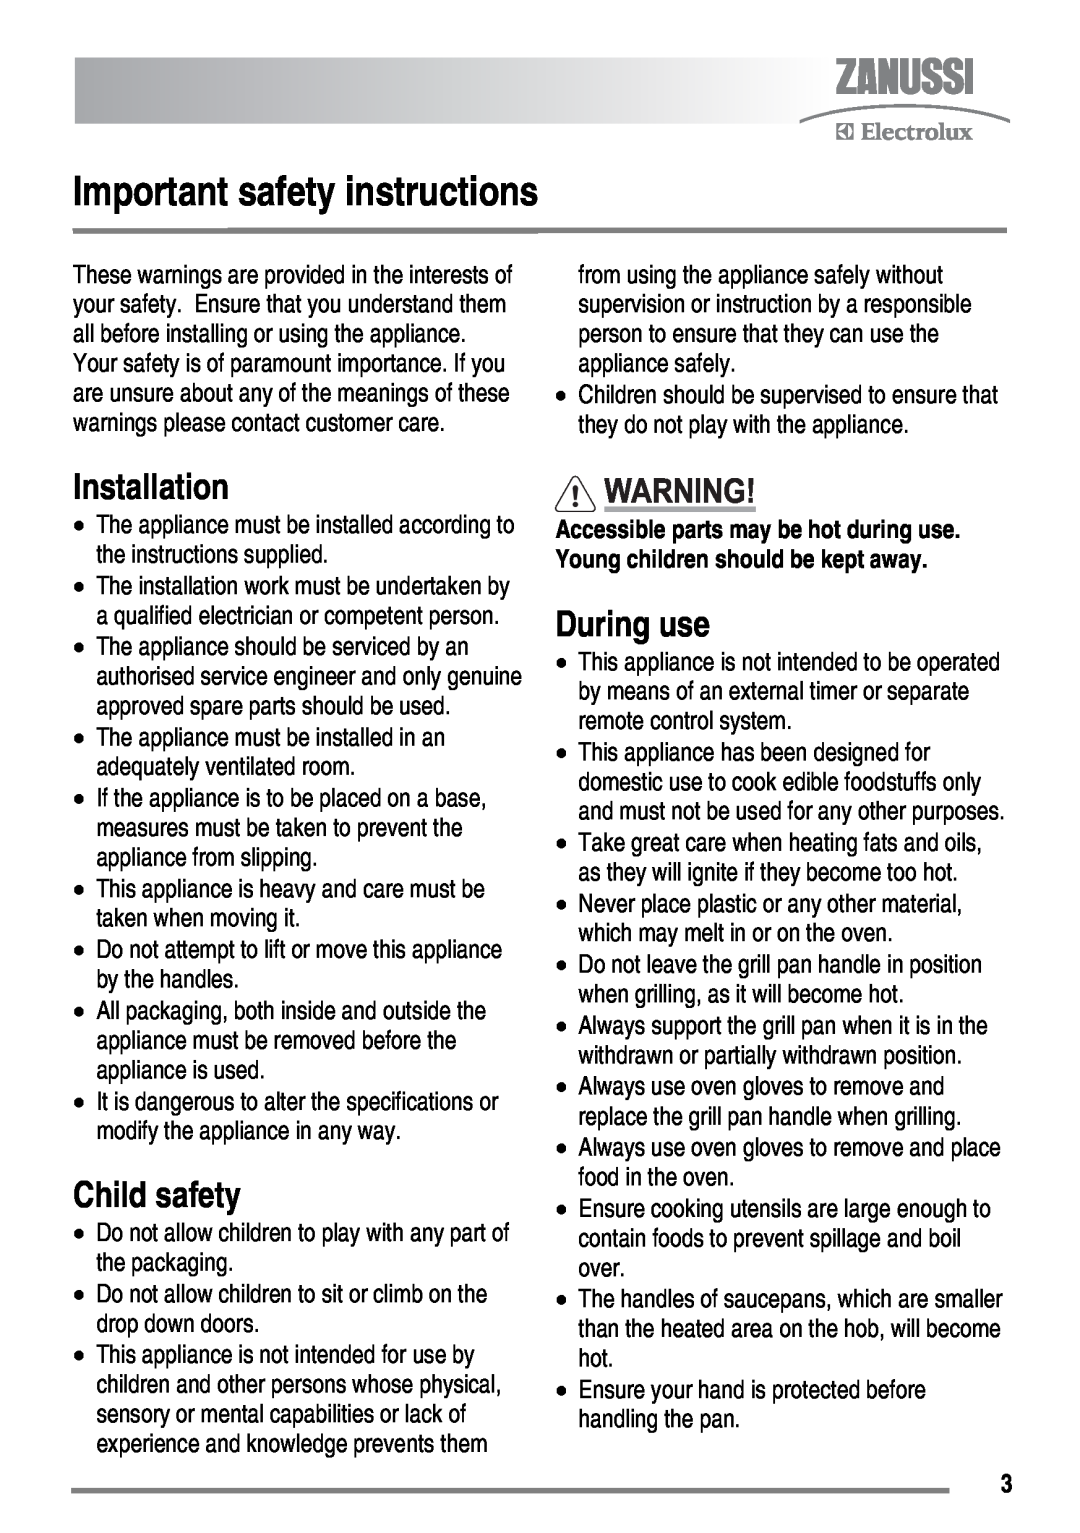 Zanussi ZKC6020 user manual Important safety instructions, Installation, Child safety, During use 